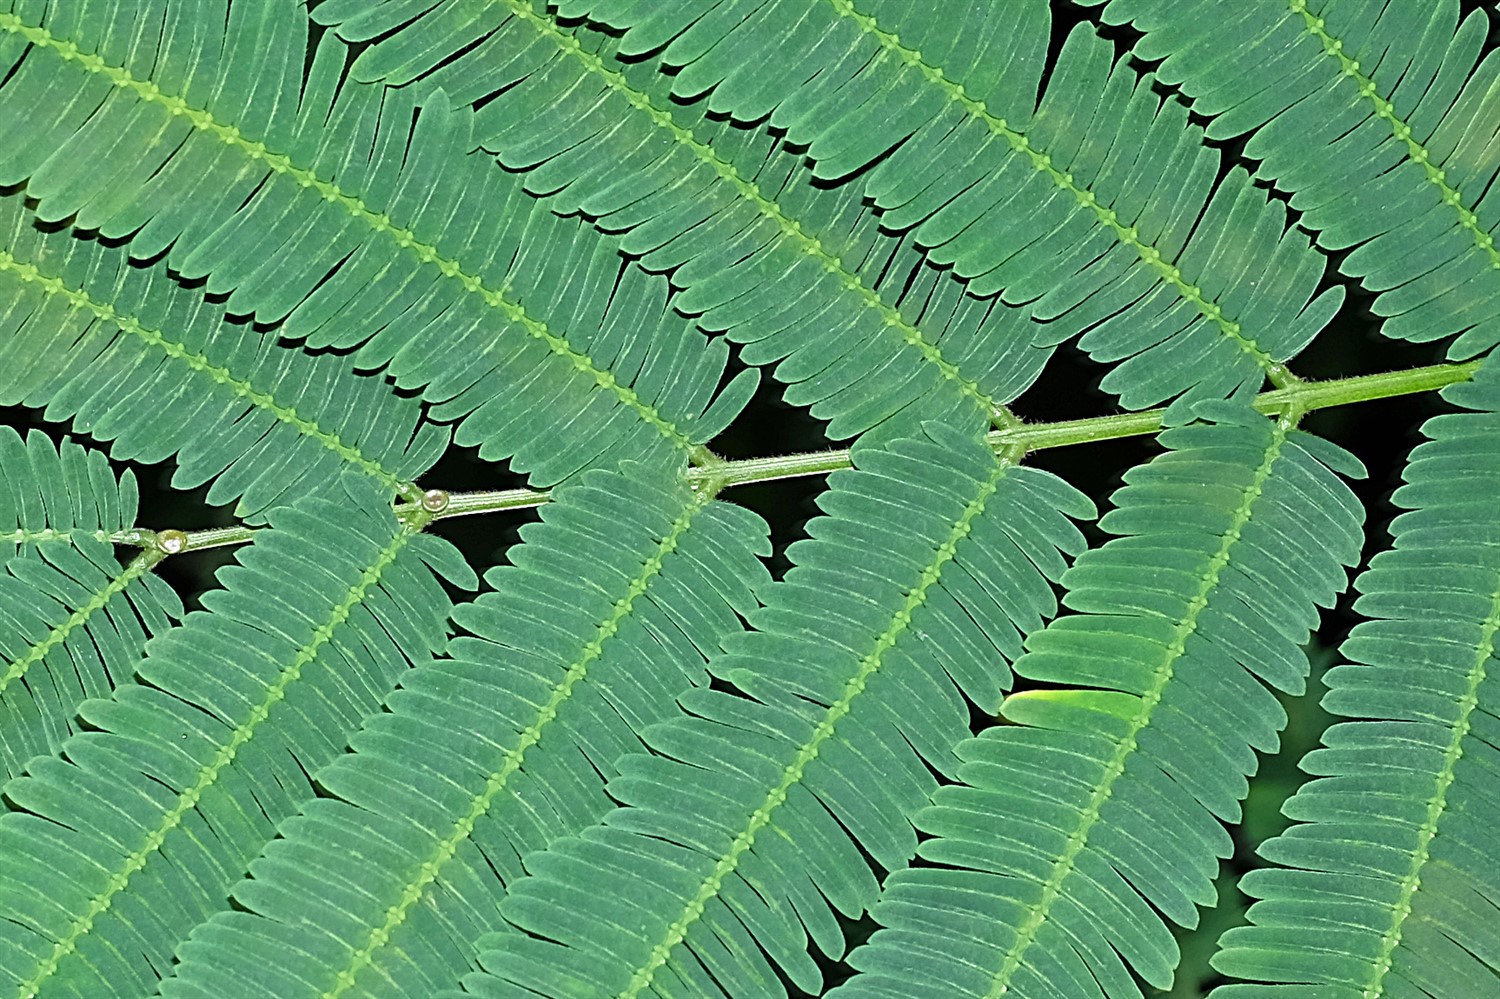 Leaflets obtuse; rachis glands at base of uppermost pairs of pinnae